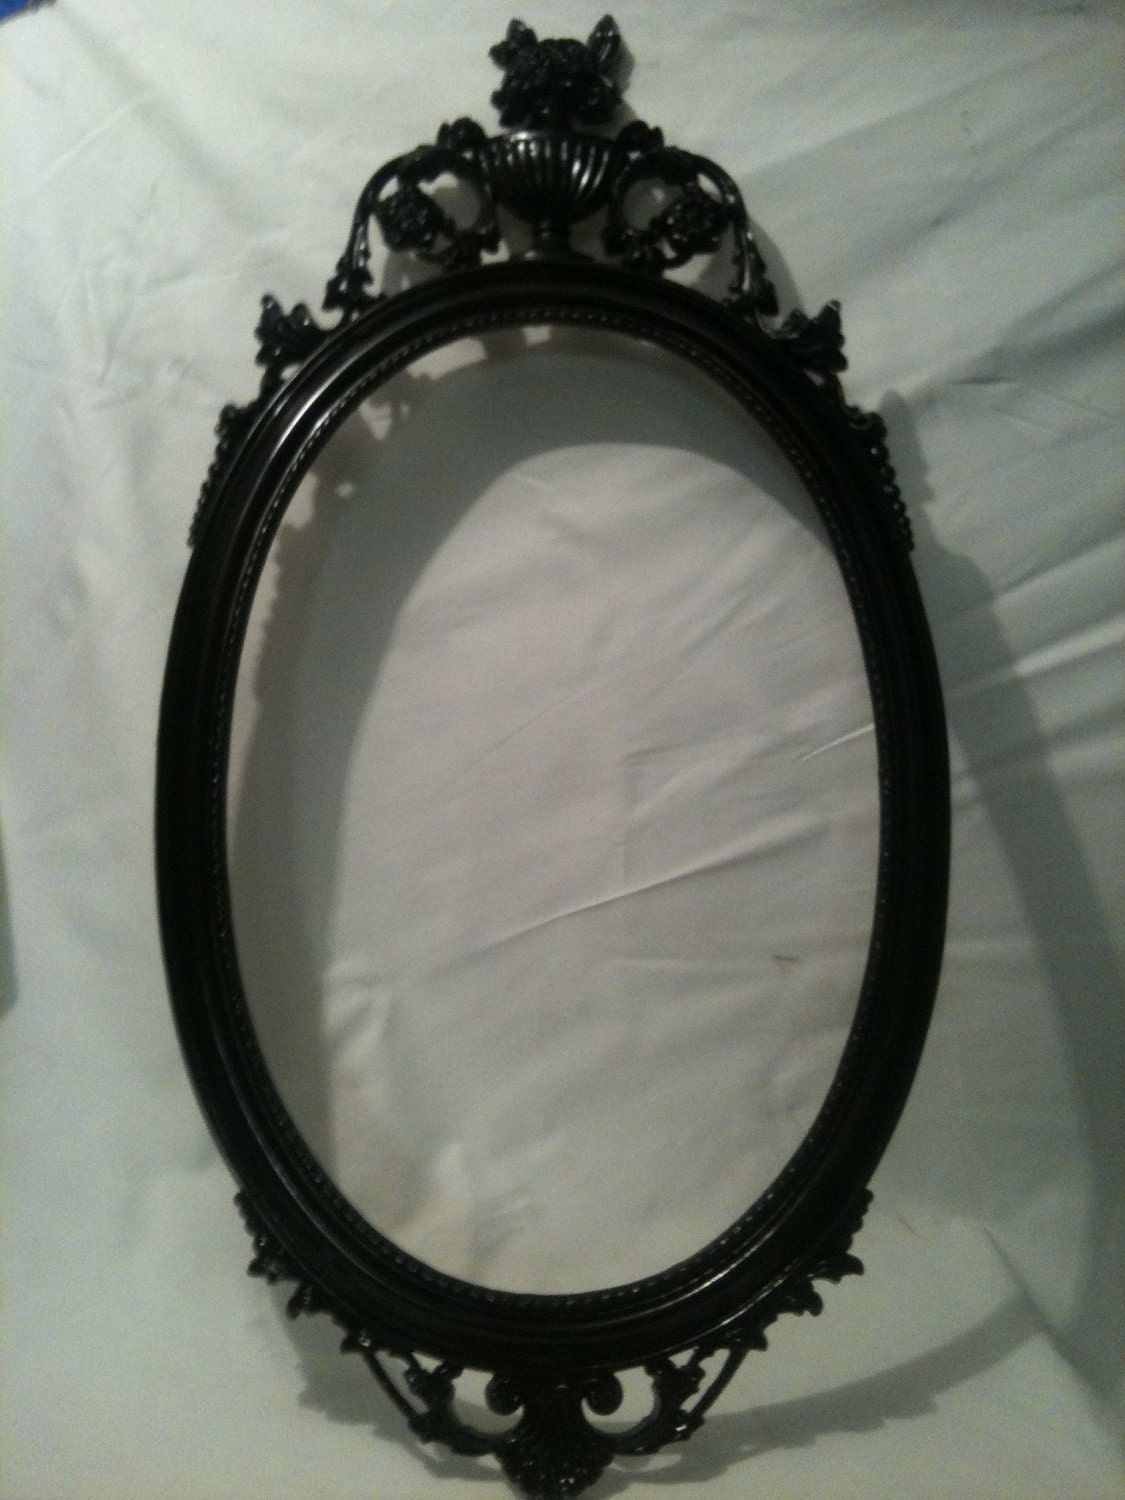 Gloss Black Oval Picture Frame Mirror Shabby Chic Baroque Throughout Black Oval Cut Wall Mirrors (View 7 of 15)